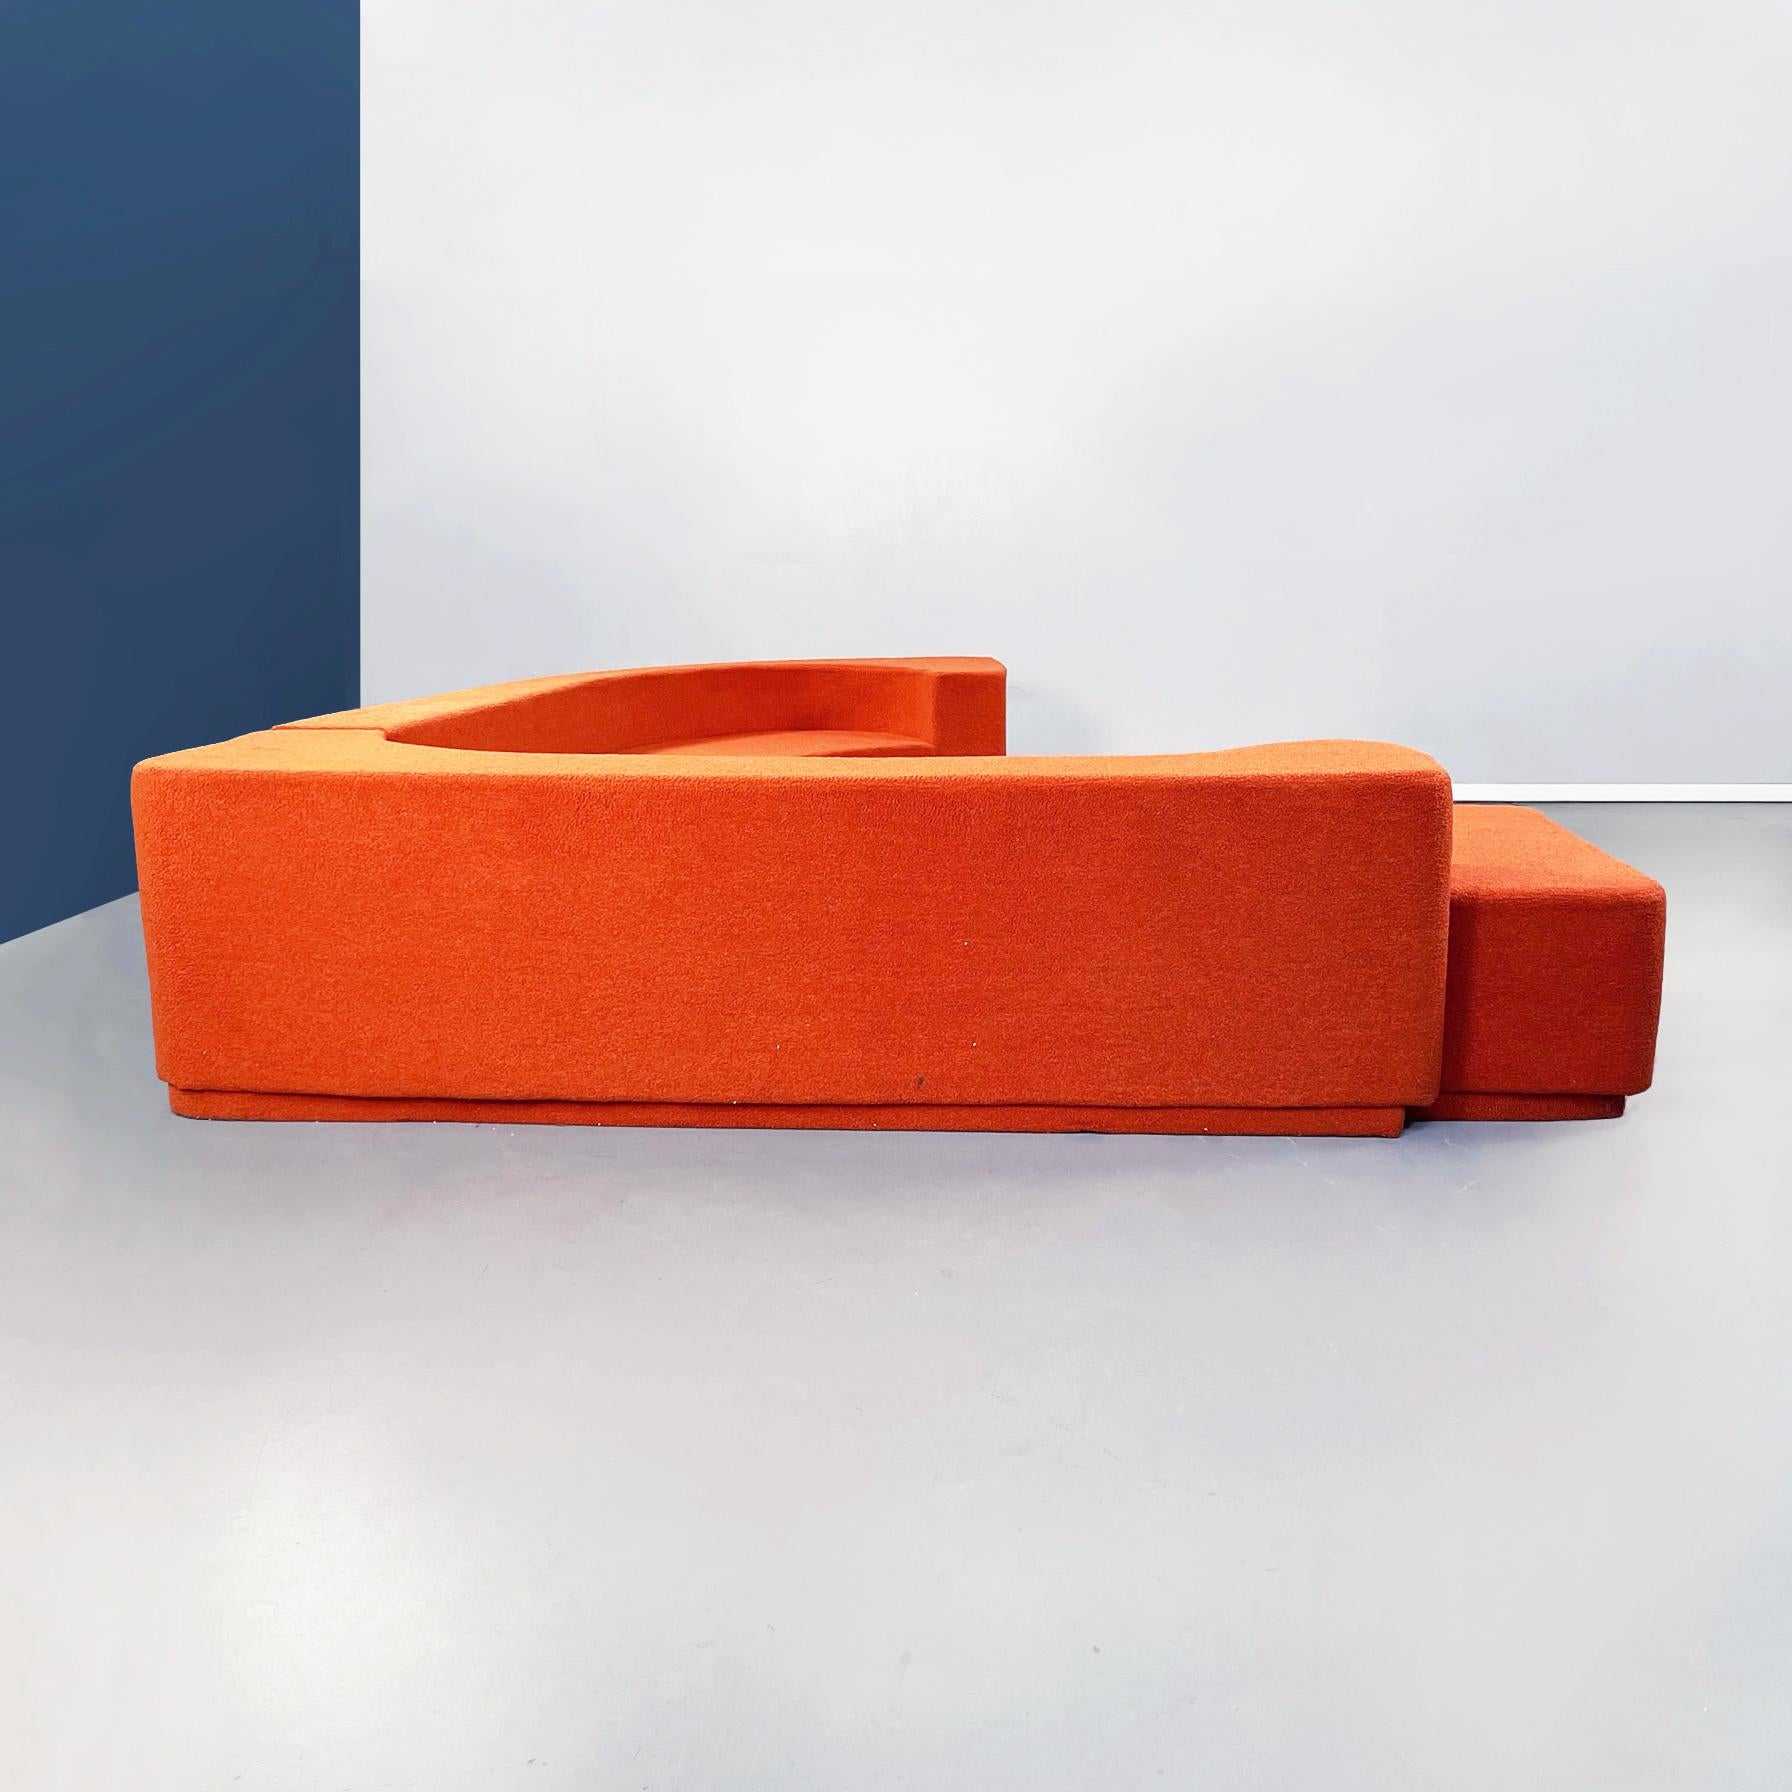 Italian Orange Lara modular sofa by Pamio, Massari and Toso for Stilwood, 1970s
Lara modular sofa in orange cotton with fully padded and legless structure, consisting of two irregularly shaped modules that can be joined in different ways, allowing